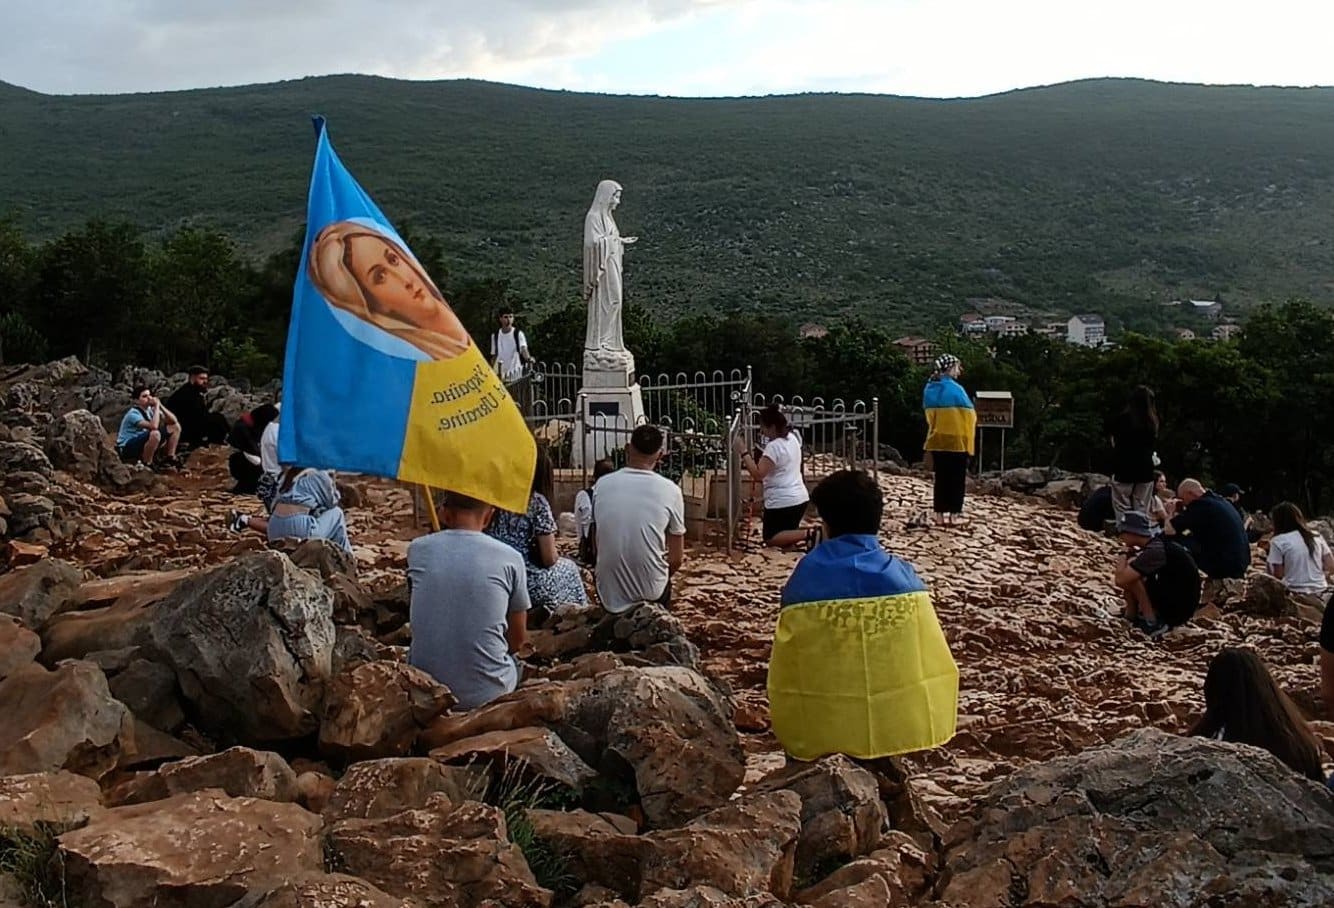 Ukrainian youth pray on Apparition Hill (Mount Podbrdo) in Medjugorje, Bosnia and Herzegovina during a May 19-27, 2024 pilgrimage for peace as Russia escalates attacks on their nation amid a war now in its 11th year. (OSV News/Sister Lucia Murashko/Oksana Dmyterko)